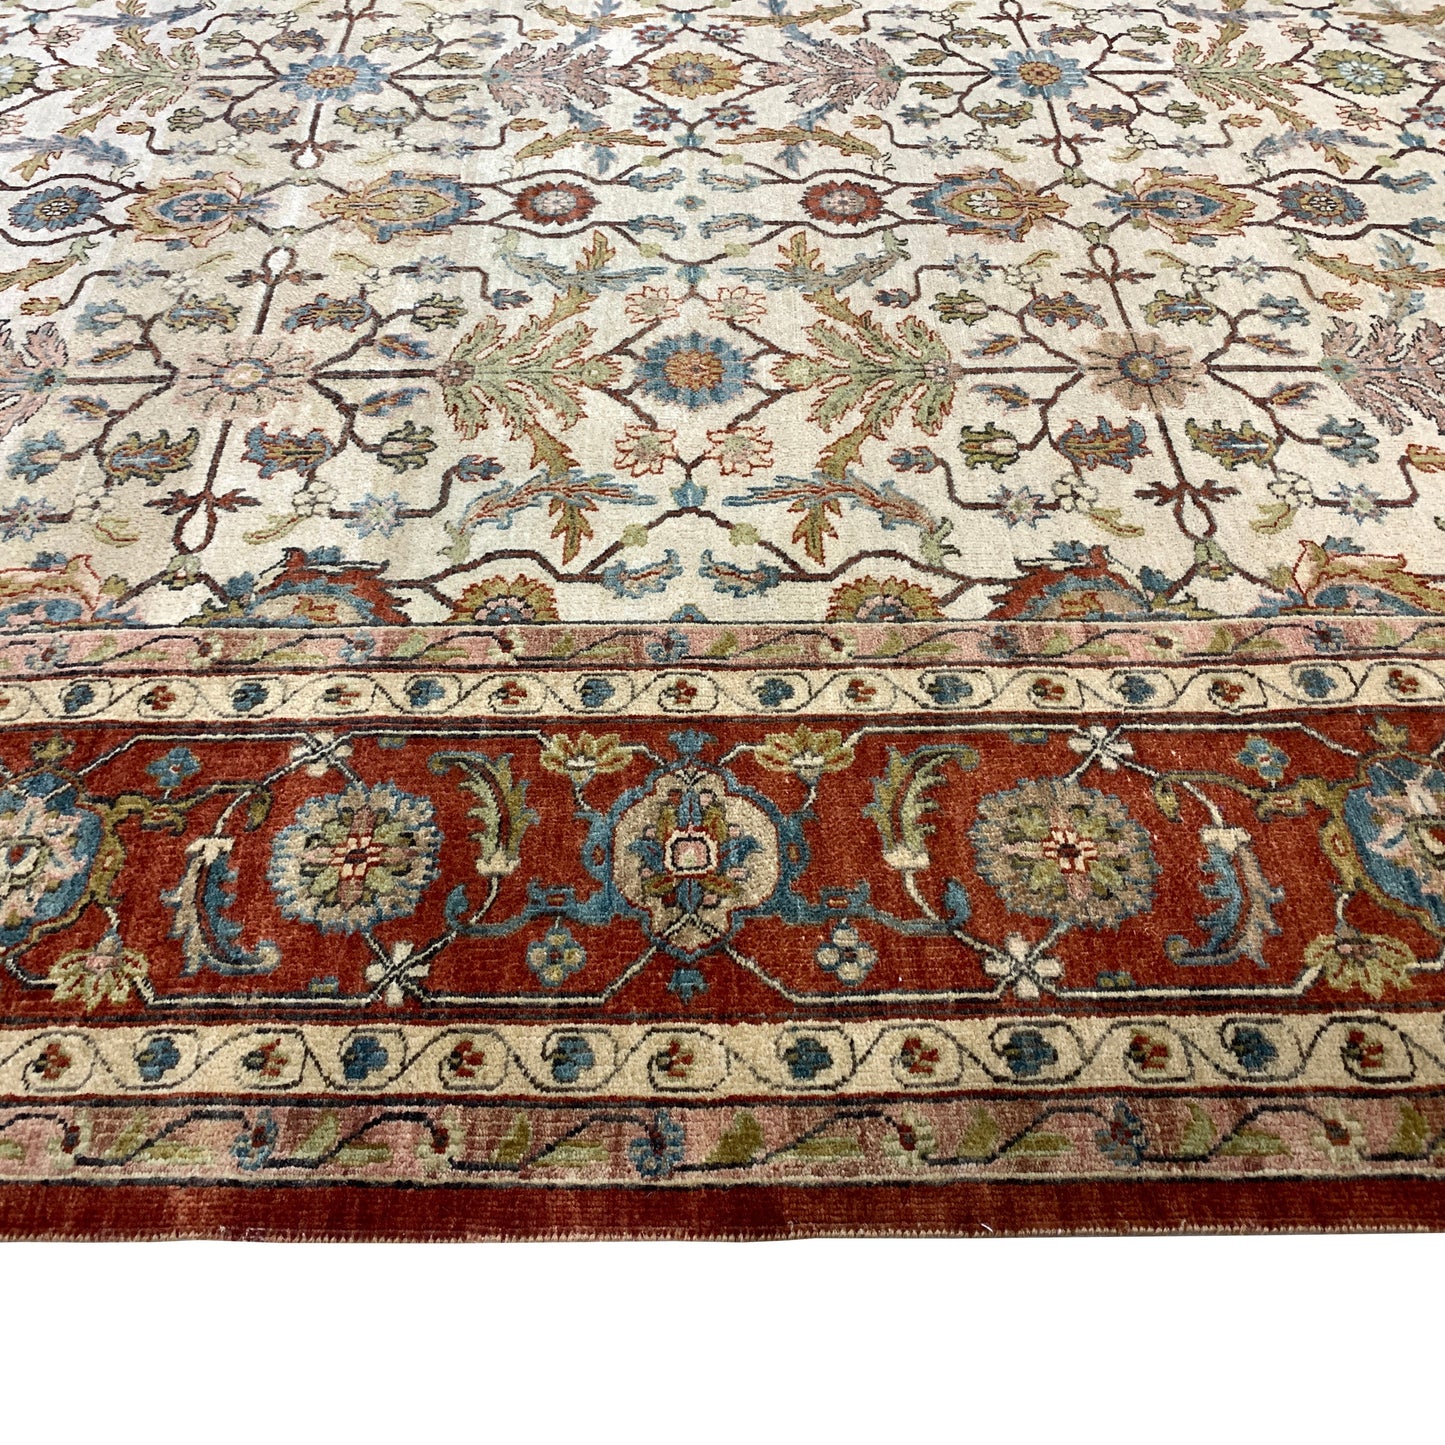 Get trendy with Garden Ivory and Rust Traditional Samarkand Pure Wool Luxury Handknotted Area Rug - Traditional Rugs available at Jaipur Oriental Rugs. Grab yours for $3165.00 today!